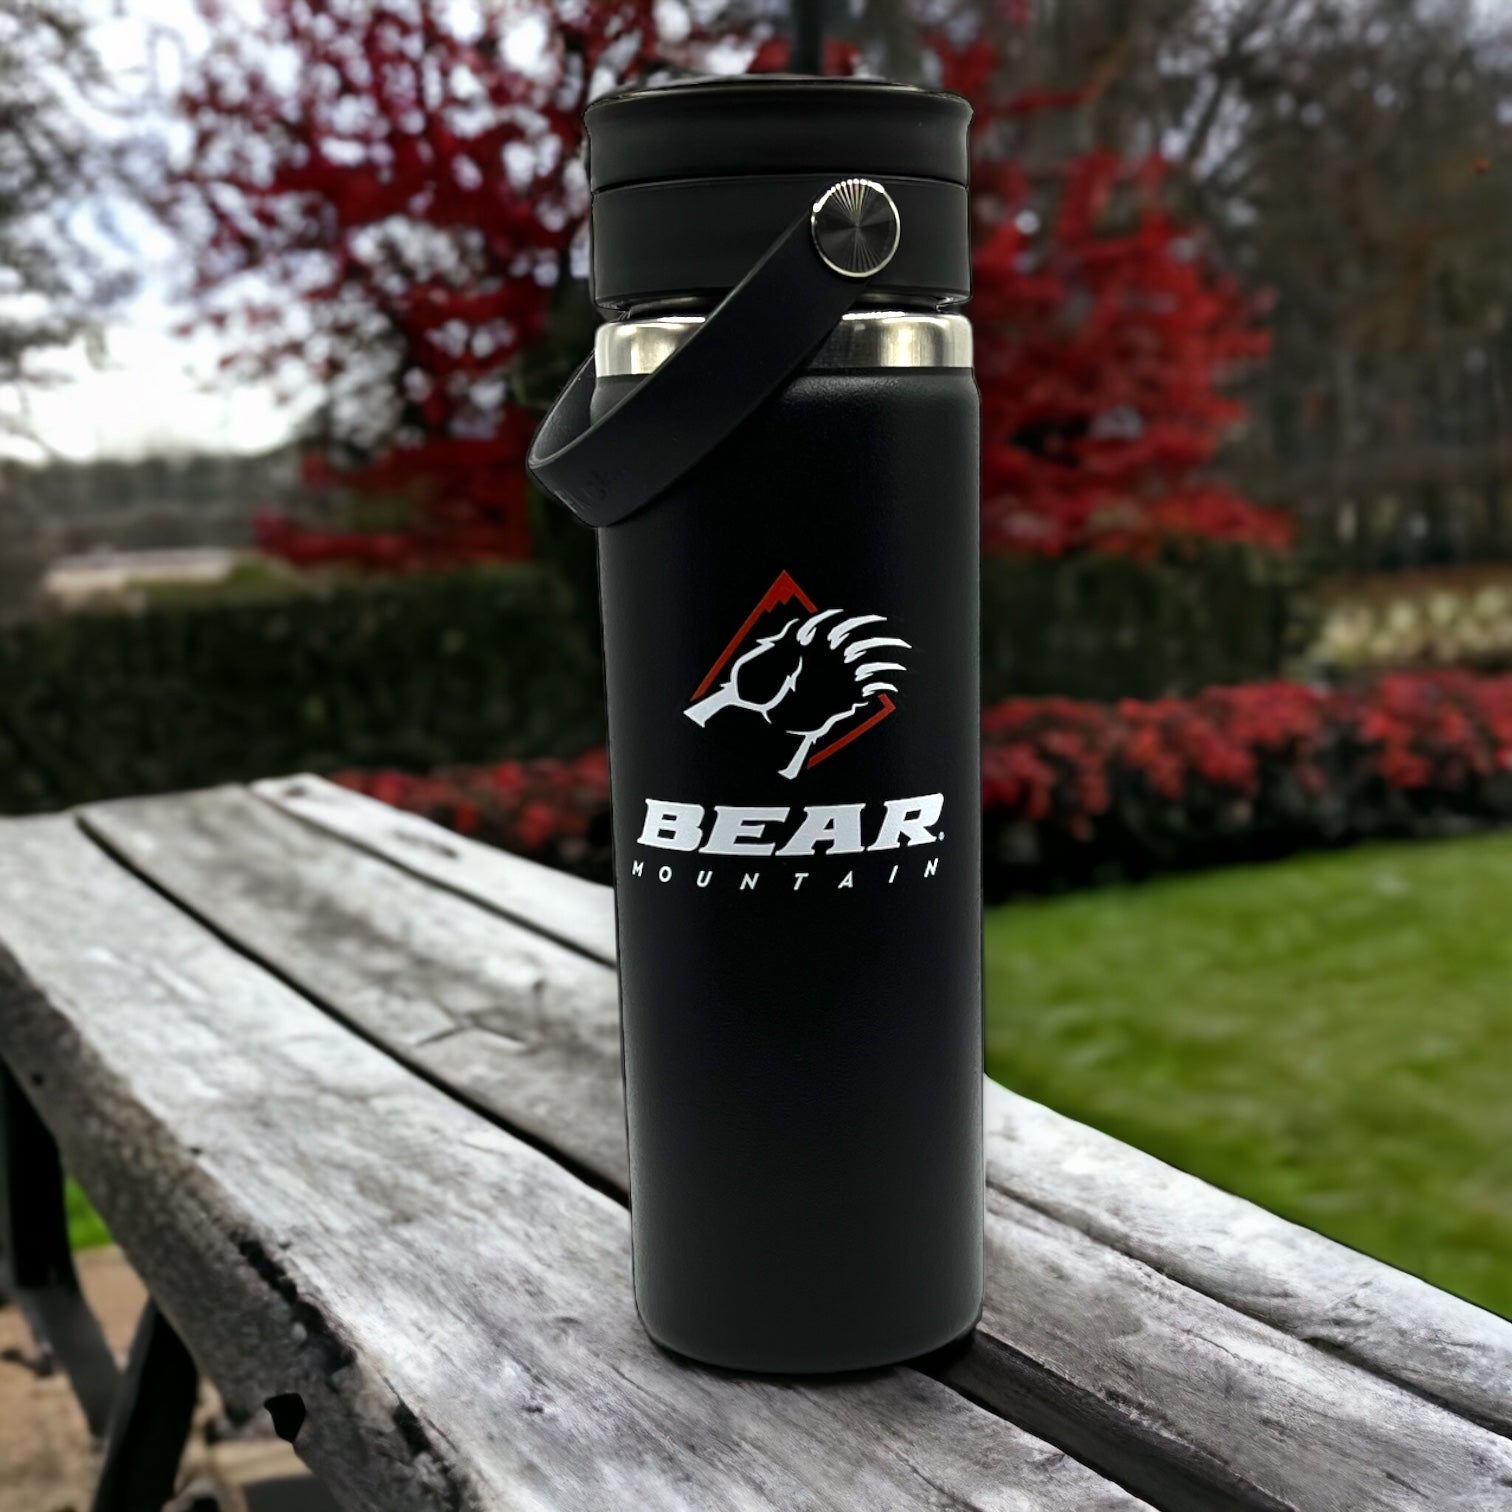 Bear Mountain branded hydro flask in black with bear claw logo